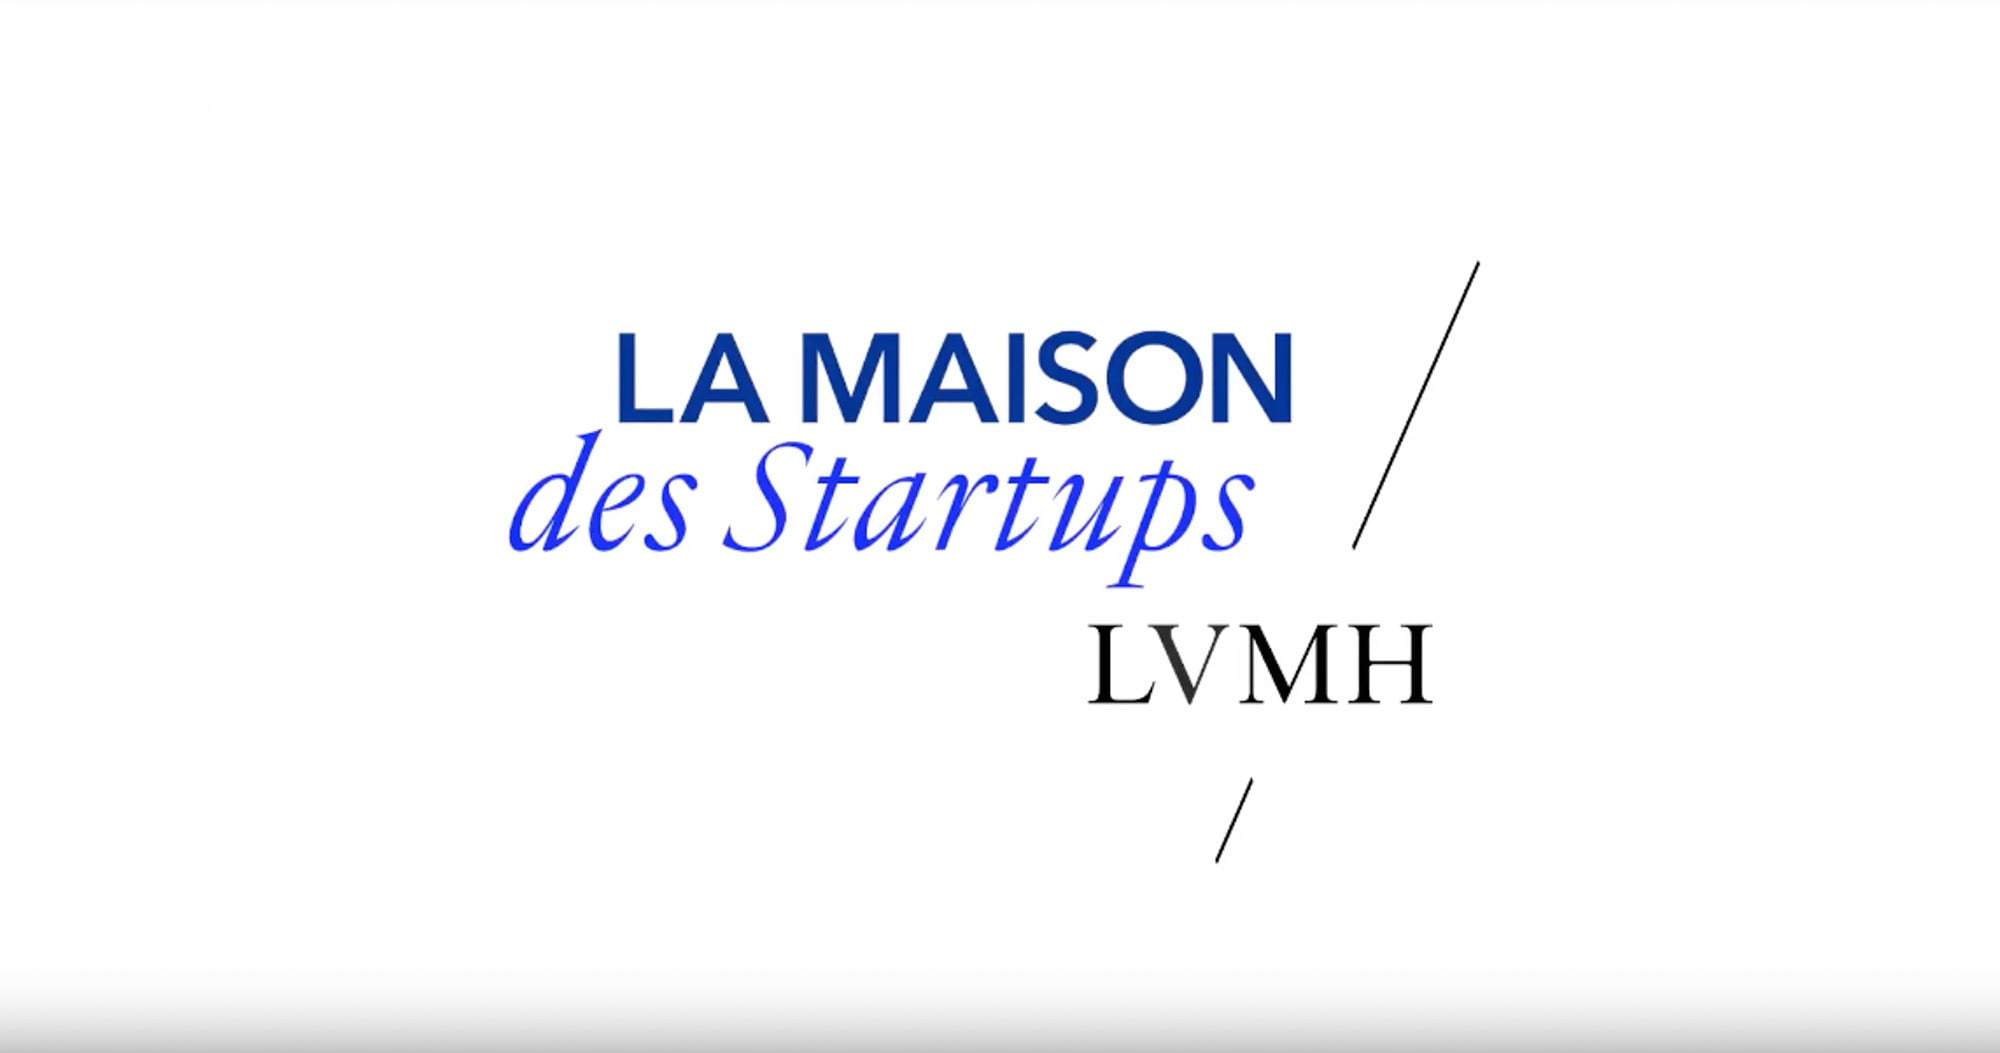 LVMH launches annual start-up accelerator program at Station F